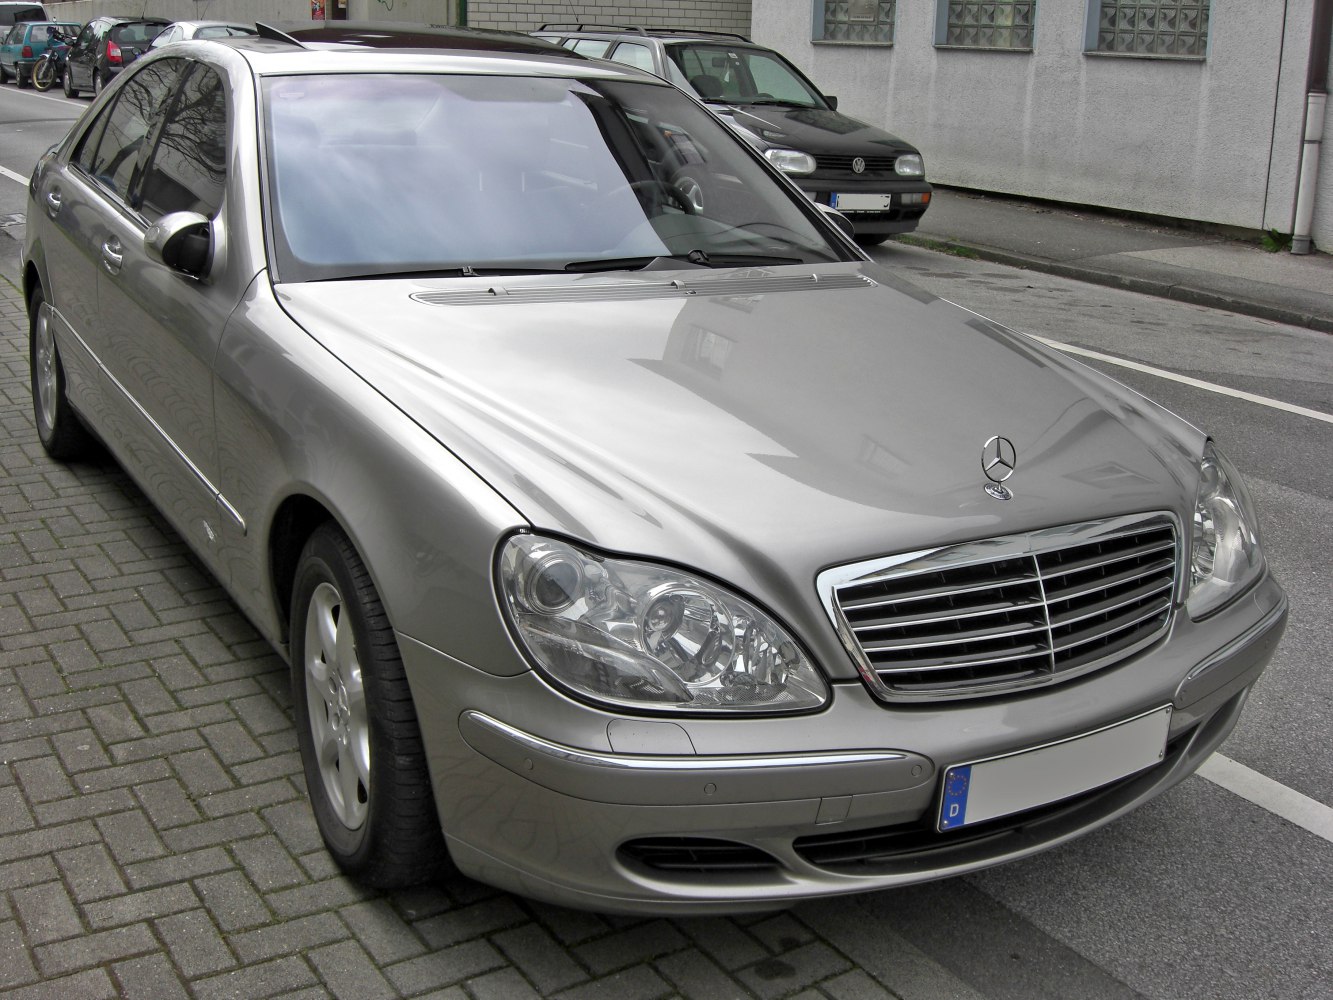 https://totalrenting.es/wp-content/uploads/2022/10/mercedes-benz-clase-s-w220-facelift-2002-2003-s-320-cdi-204-cv-g-tronic-berlina.png